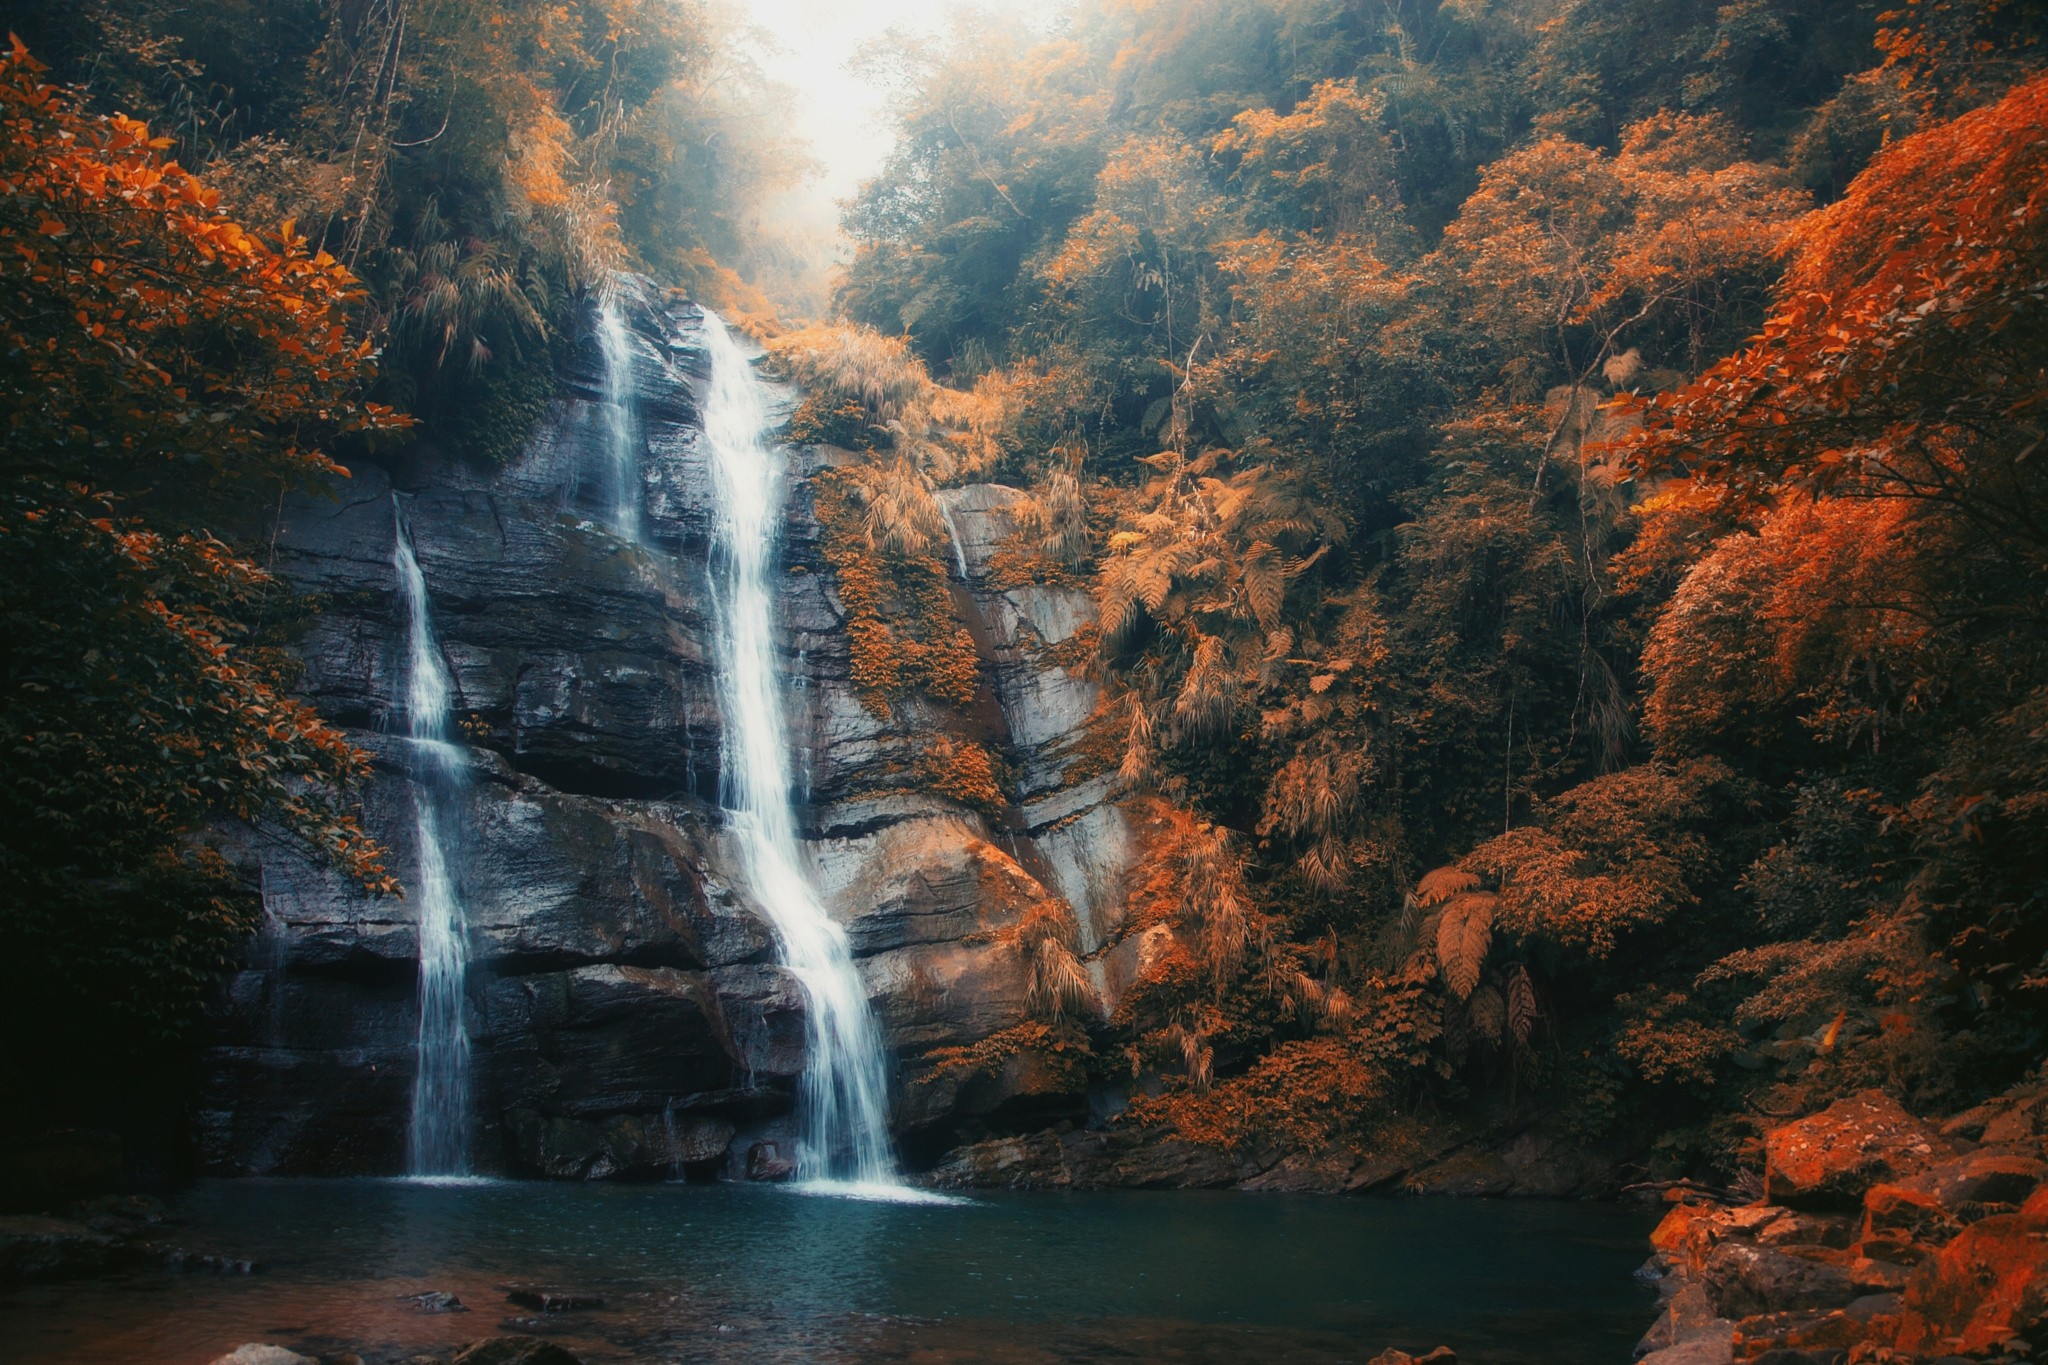 General 2048x1365 nature waterfall mist fall forest daylight orange leaves pond